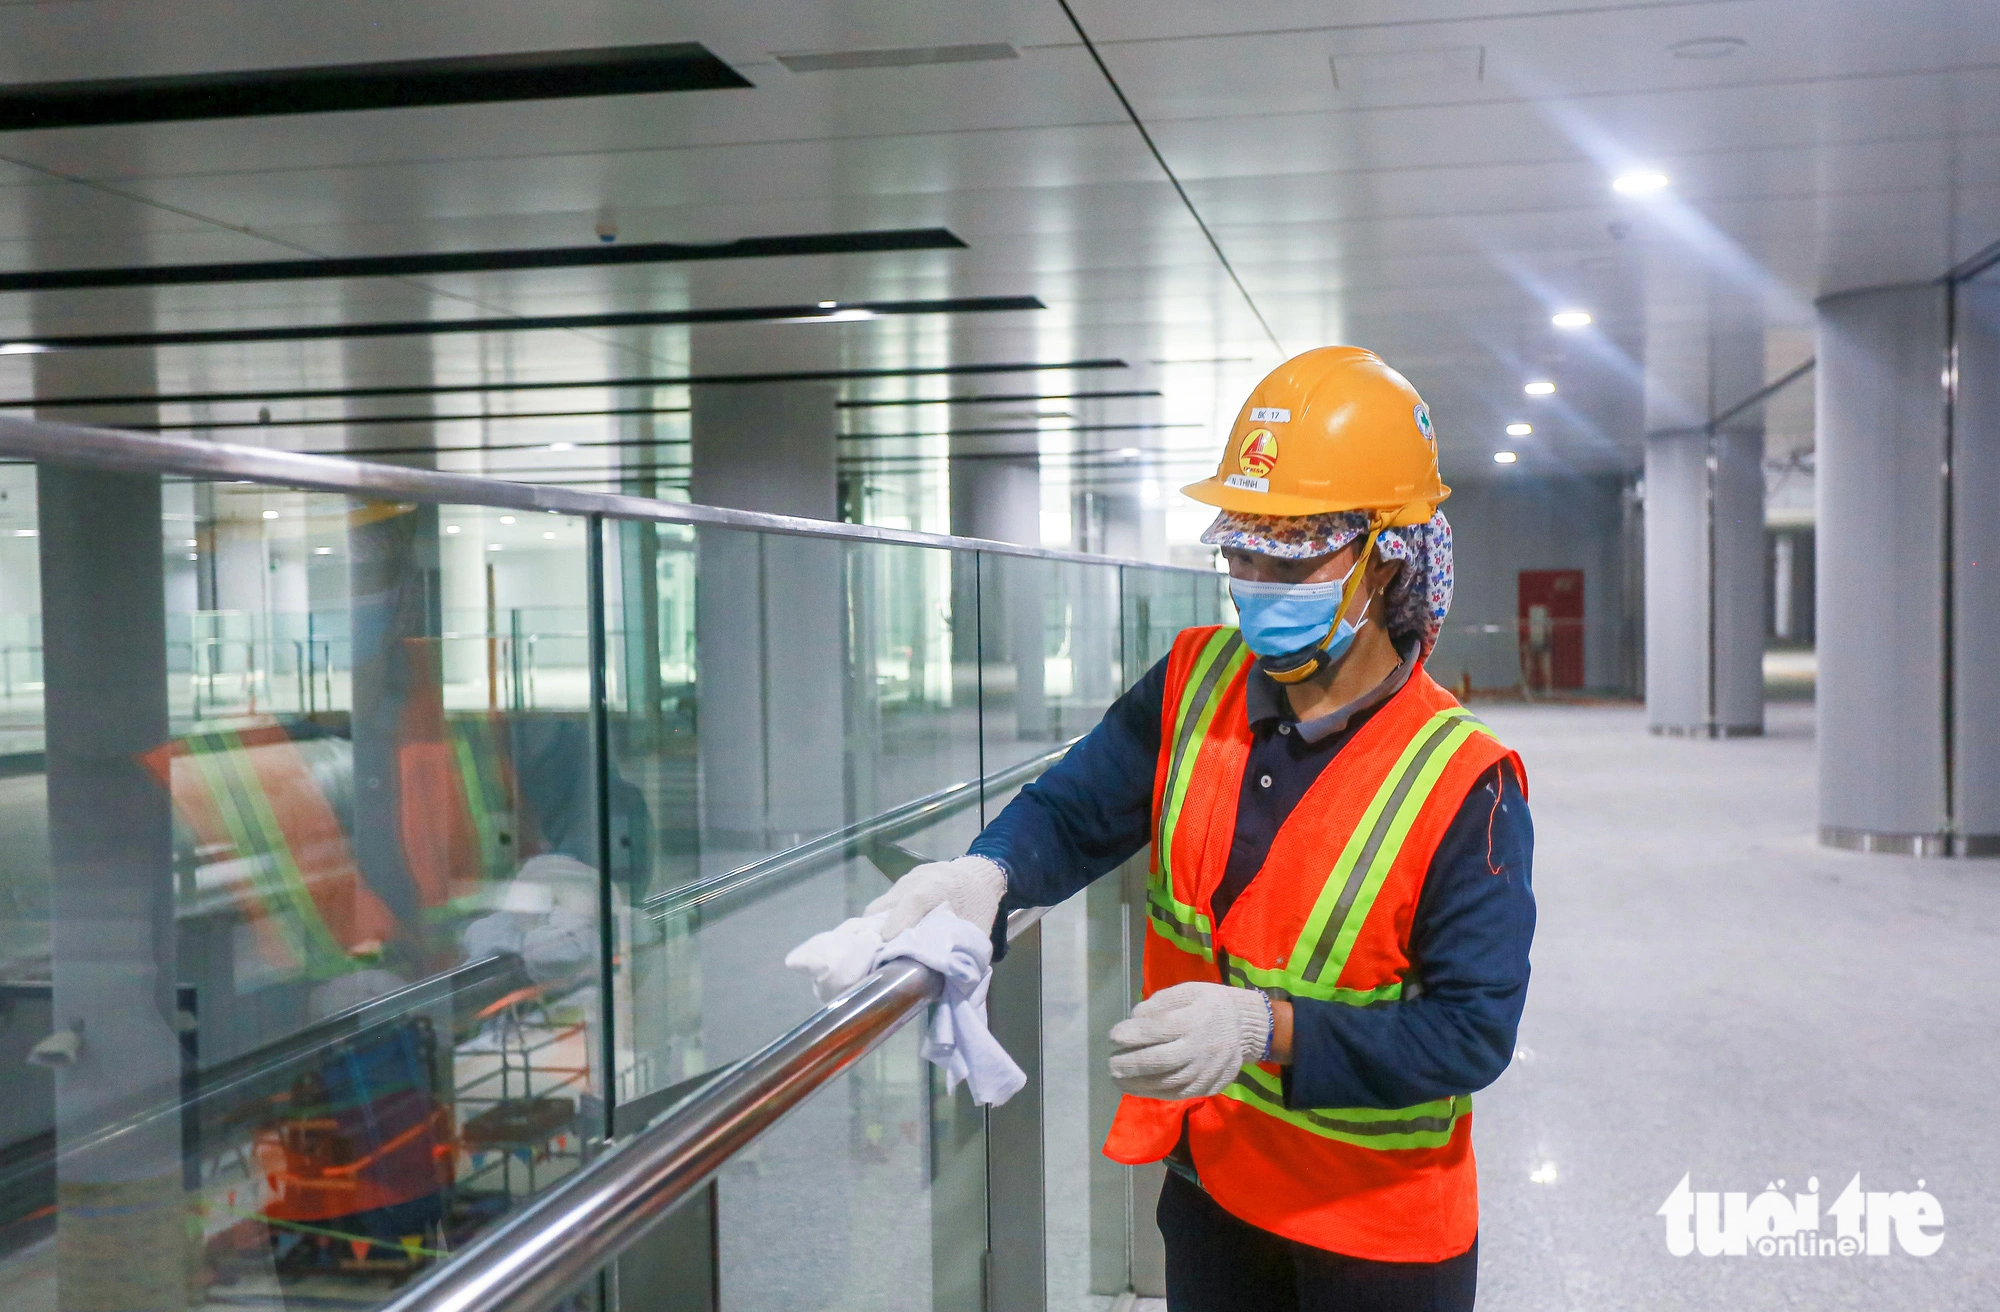 A construction worker cleans a handrail at the underground Ben Thanh station, which will service Ho Chi Minh City’s Metro Line No. 1. Photo: Chau Tuan / Tuoi Tre